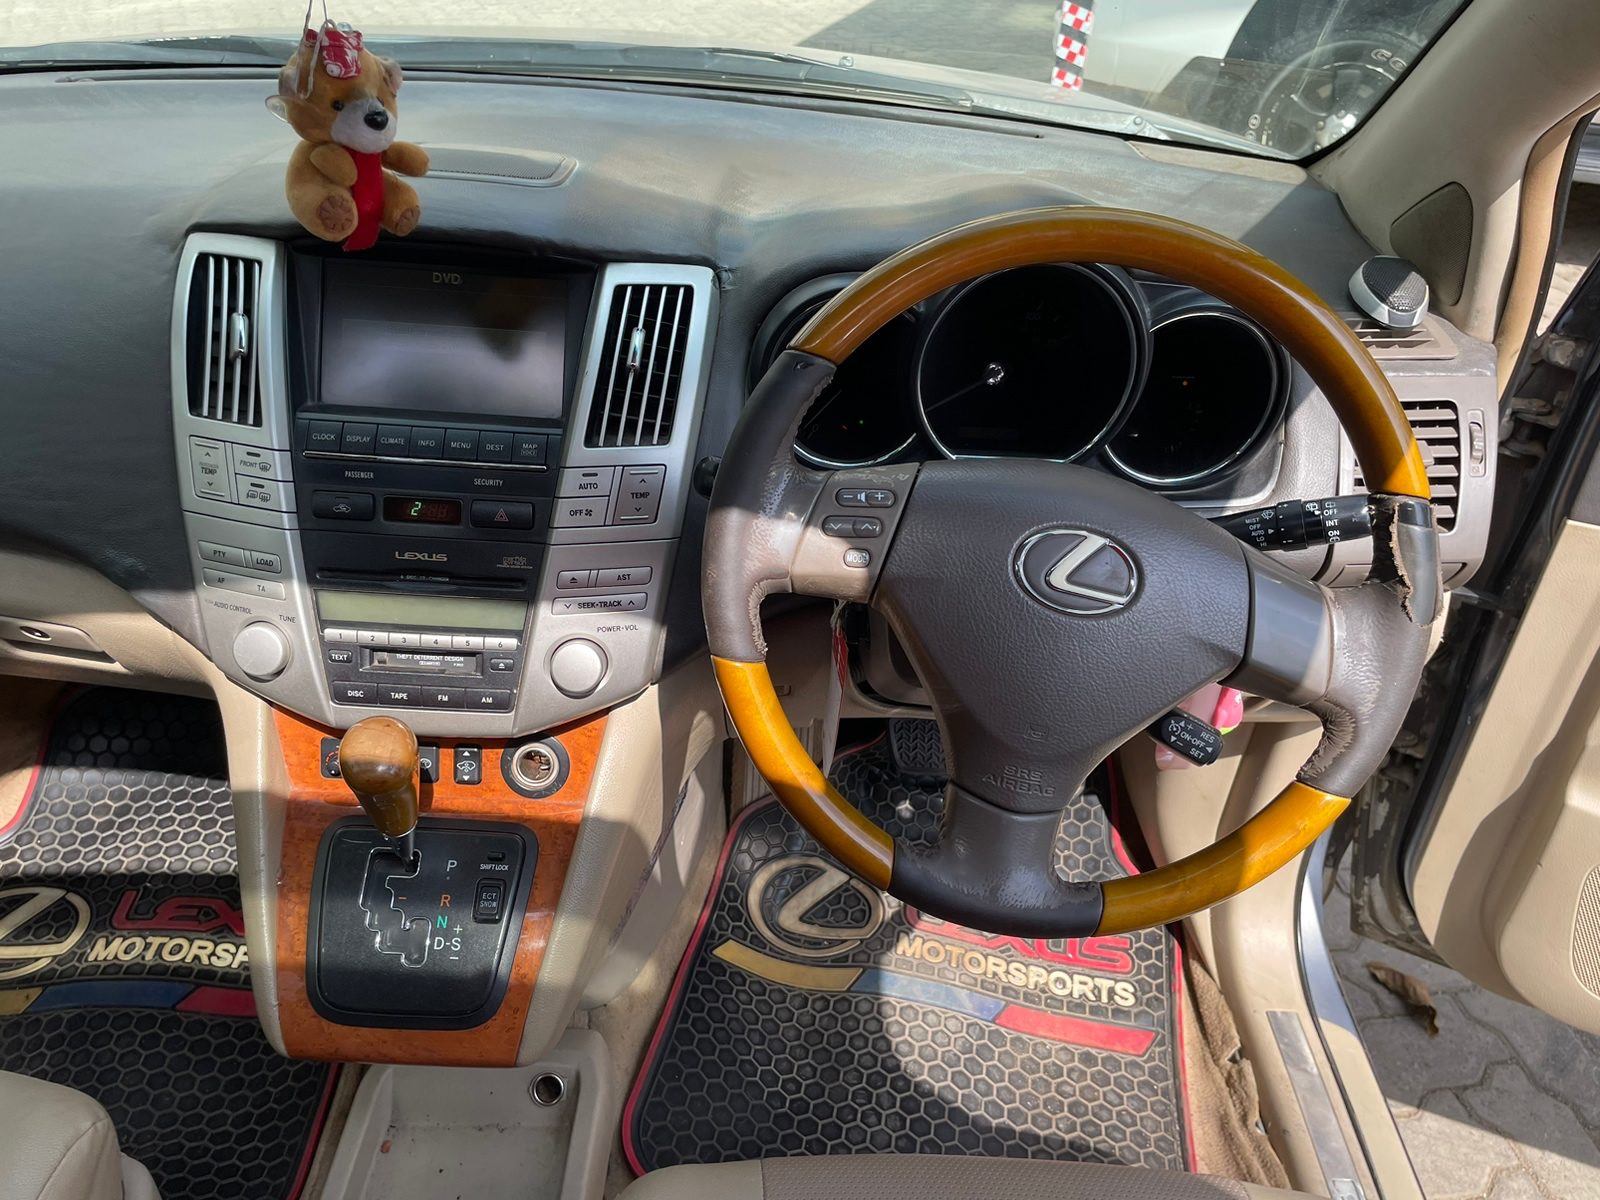 LEXUS RX 300 SUNROOF You Pay 30% Deposit Trade in OK EXCLUSIVE For Sale in Kenya